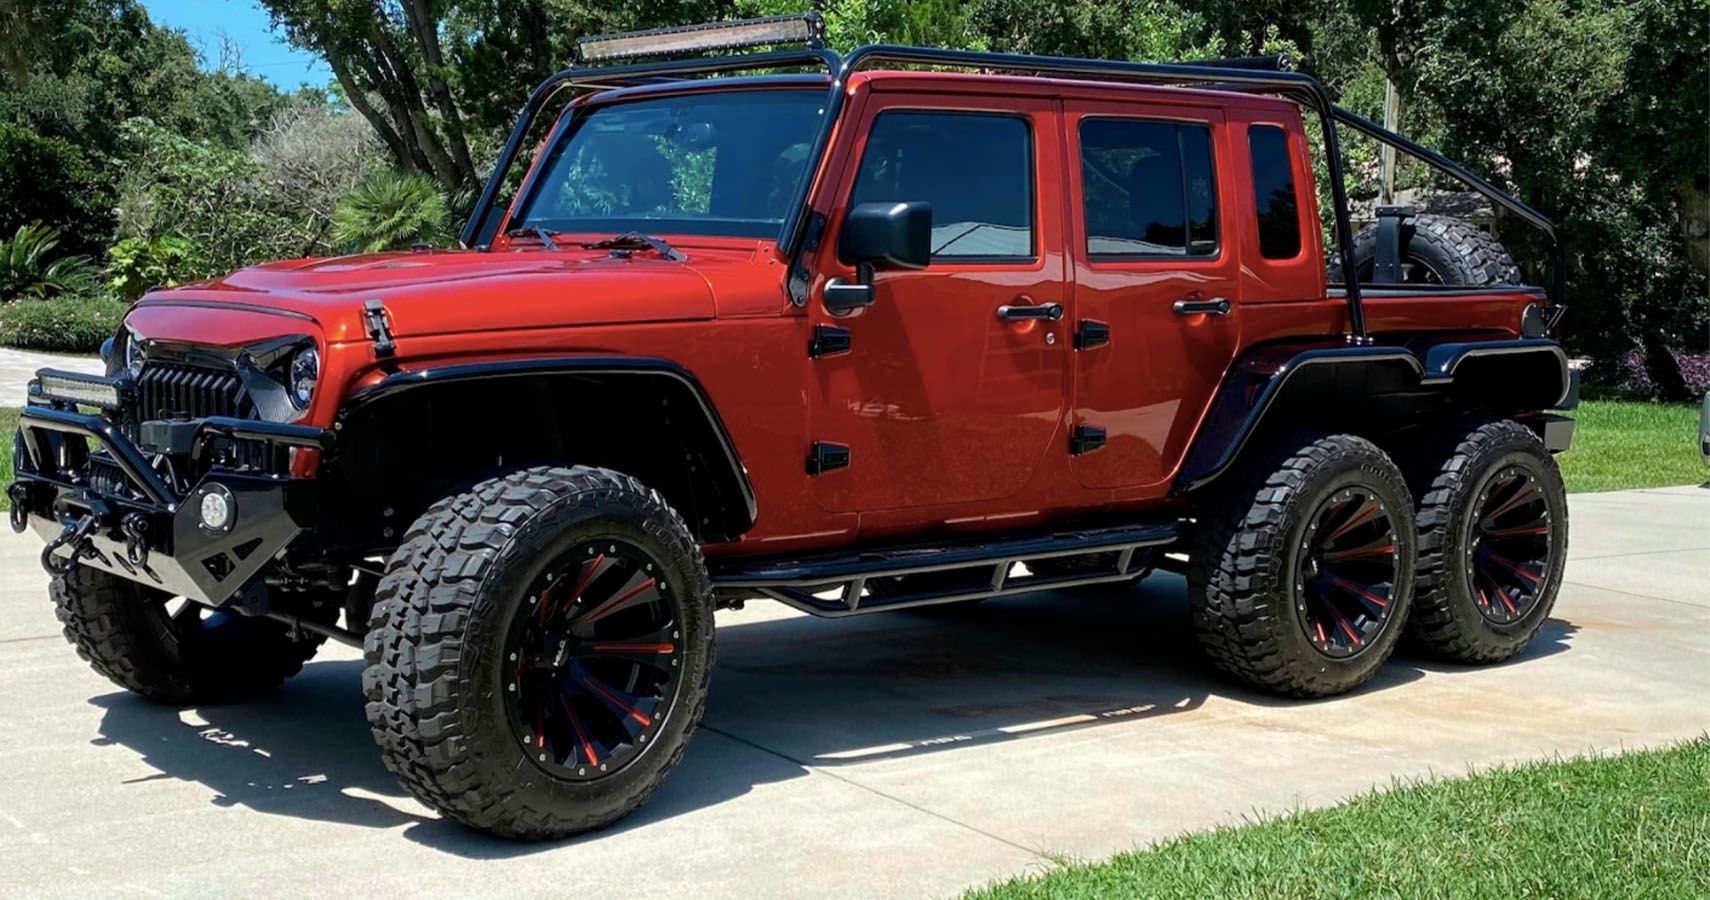 Hellcat-Powered 6x6 Jeep Wrangler Pickup Is A One-Off Off-Road Special